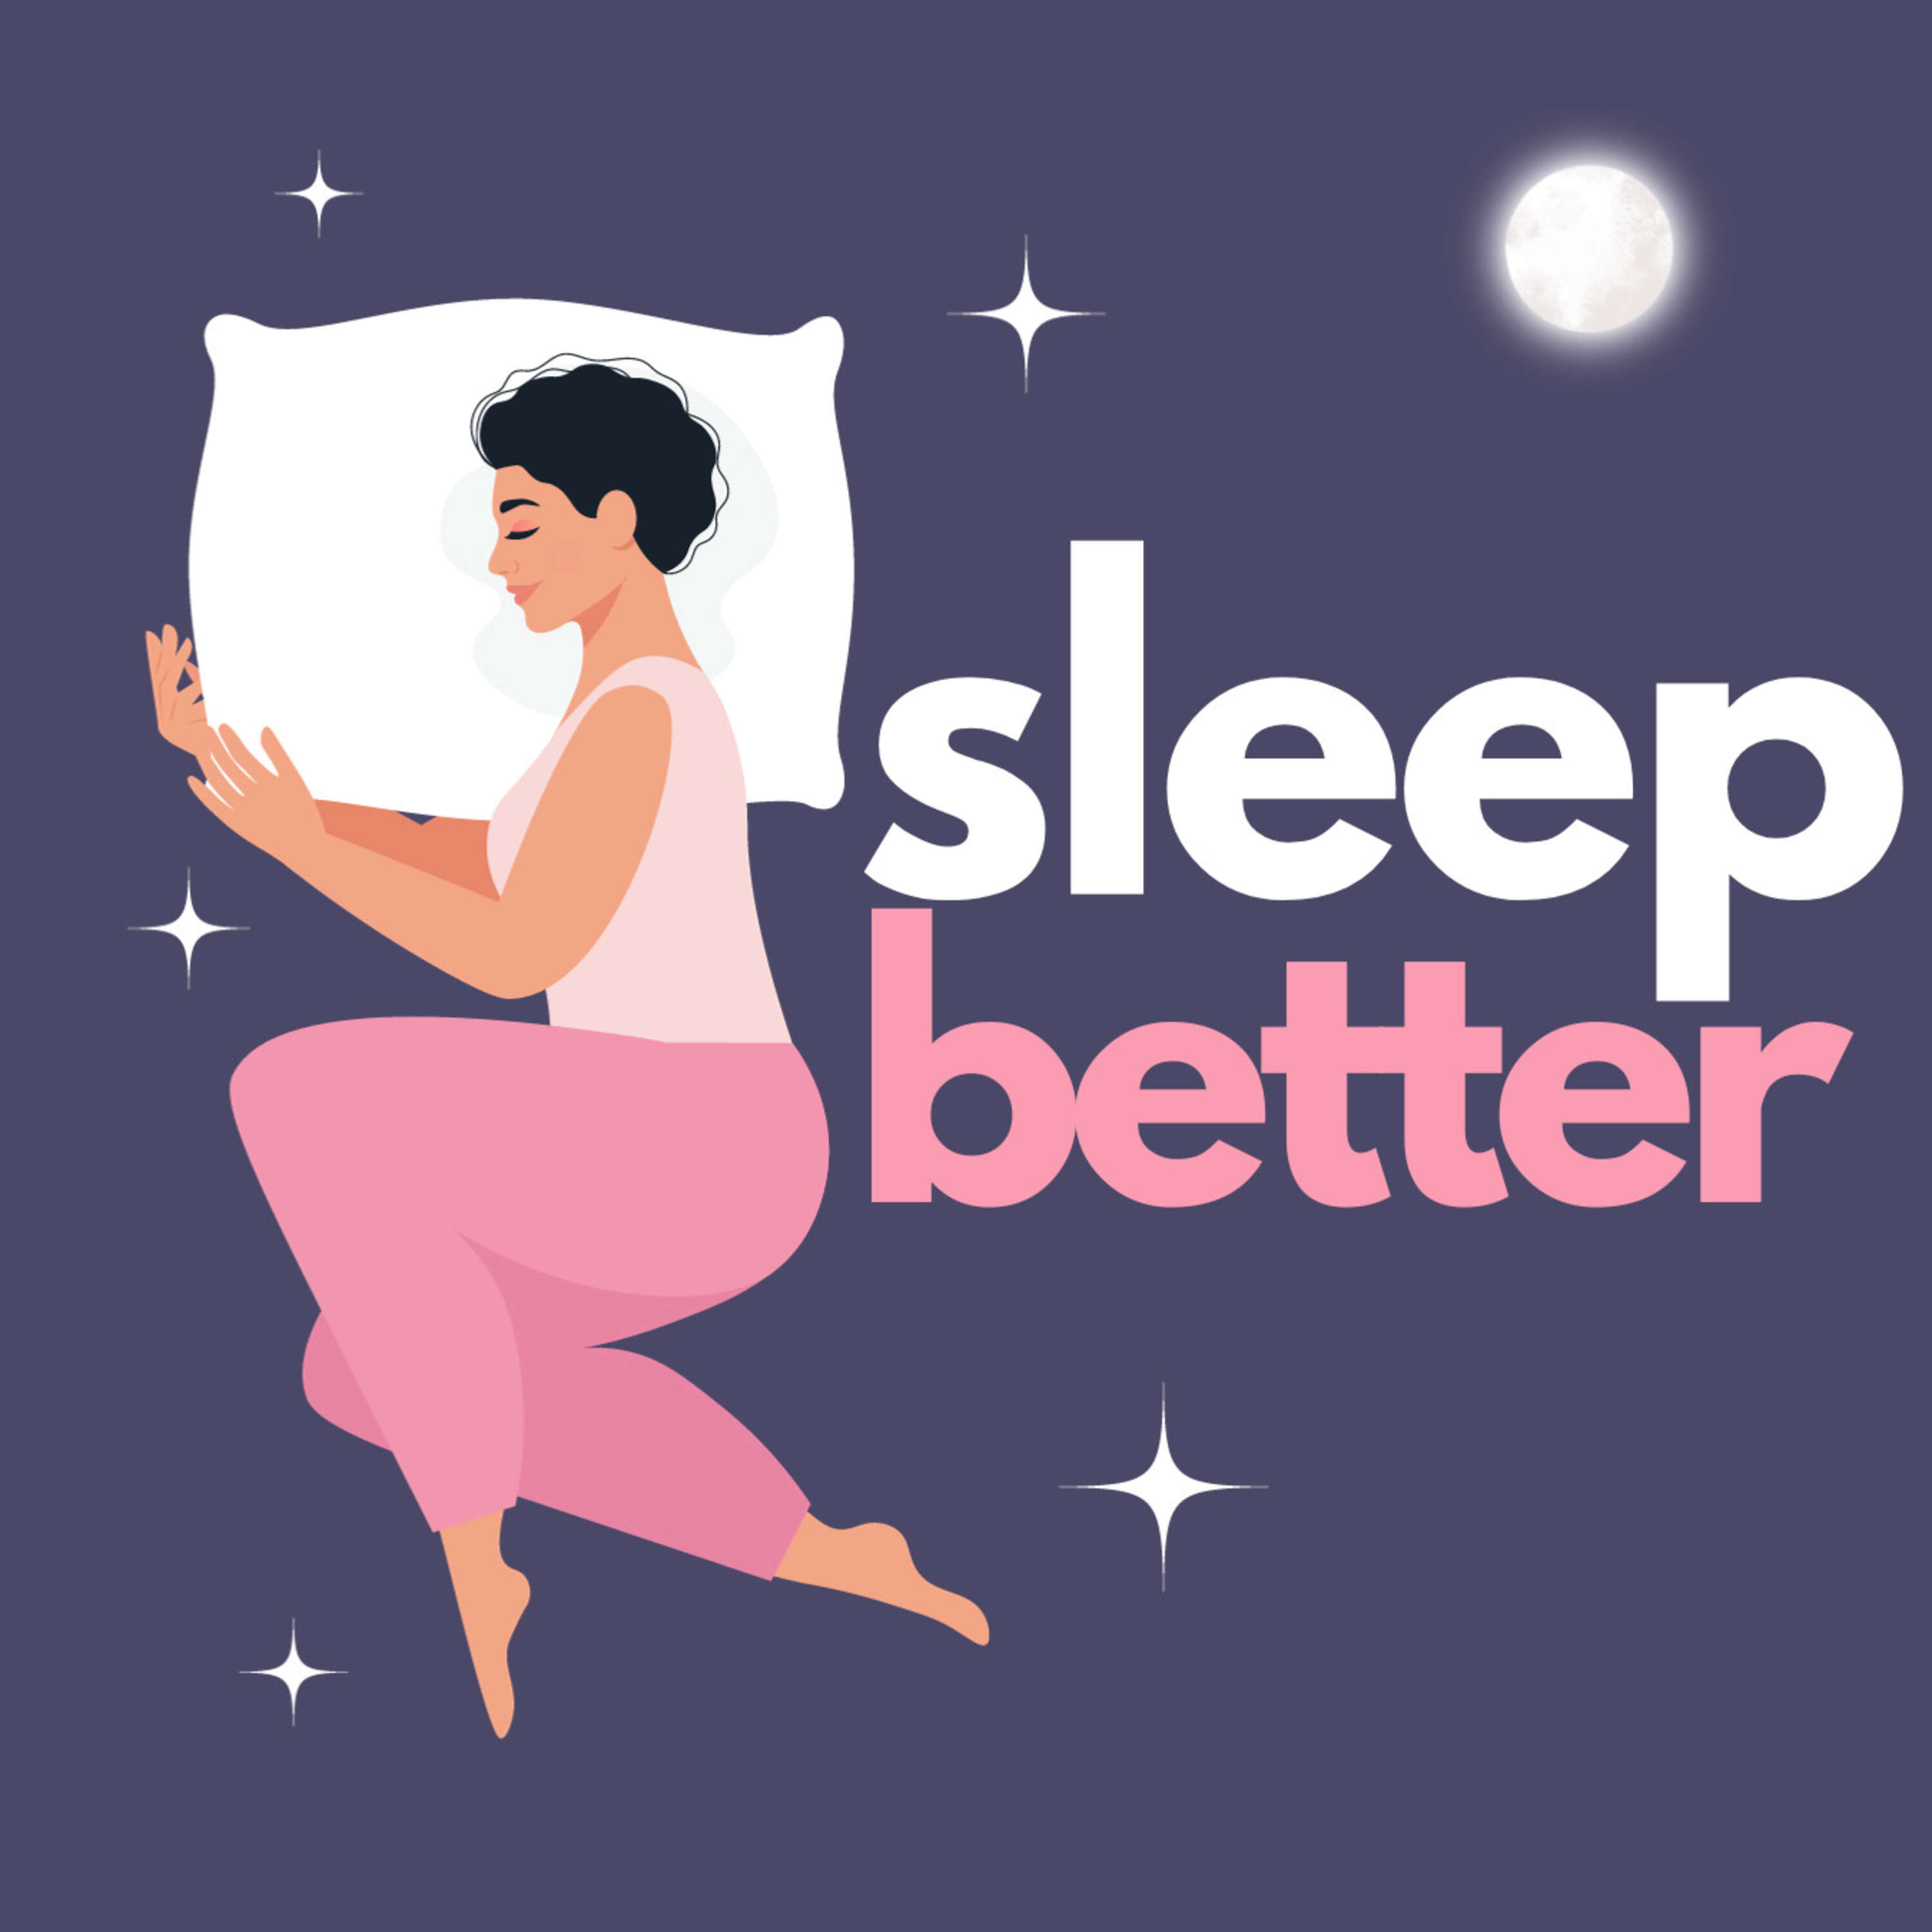 Insomnia No More: Find Serenity with the Perfect Sleep Playlist